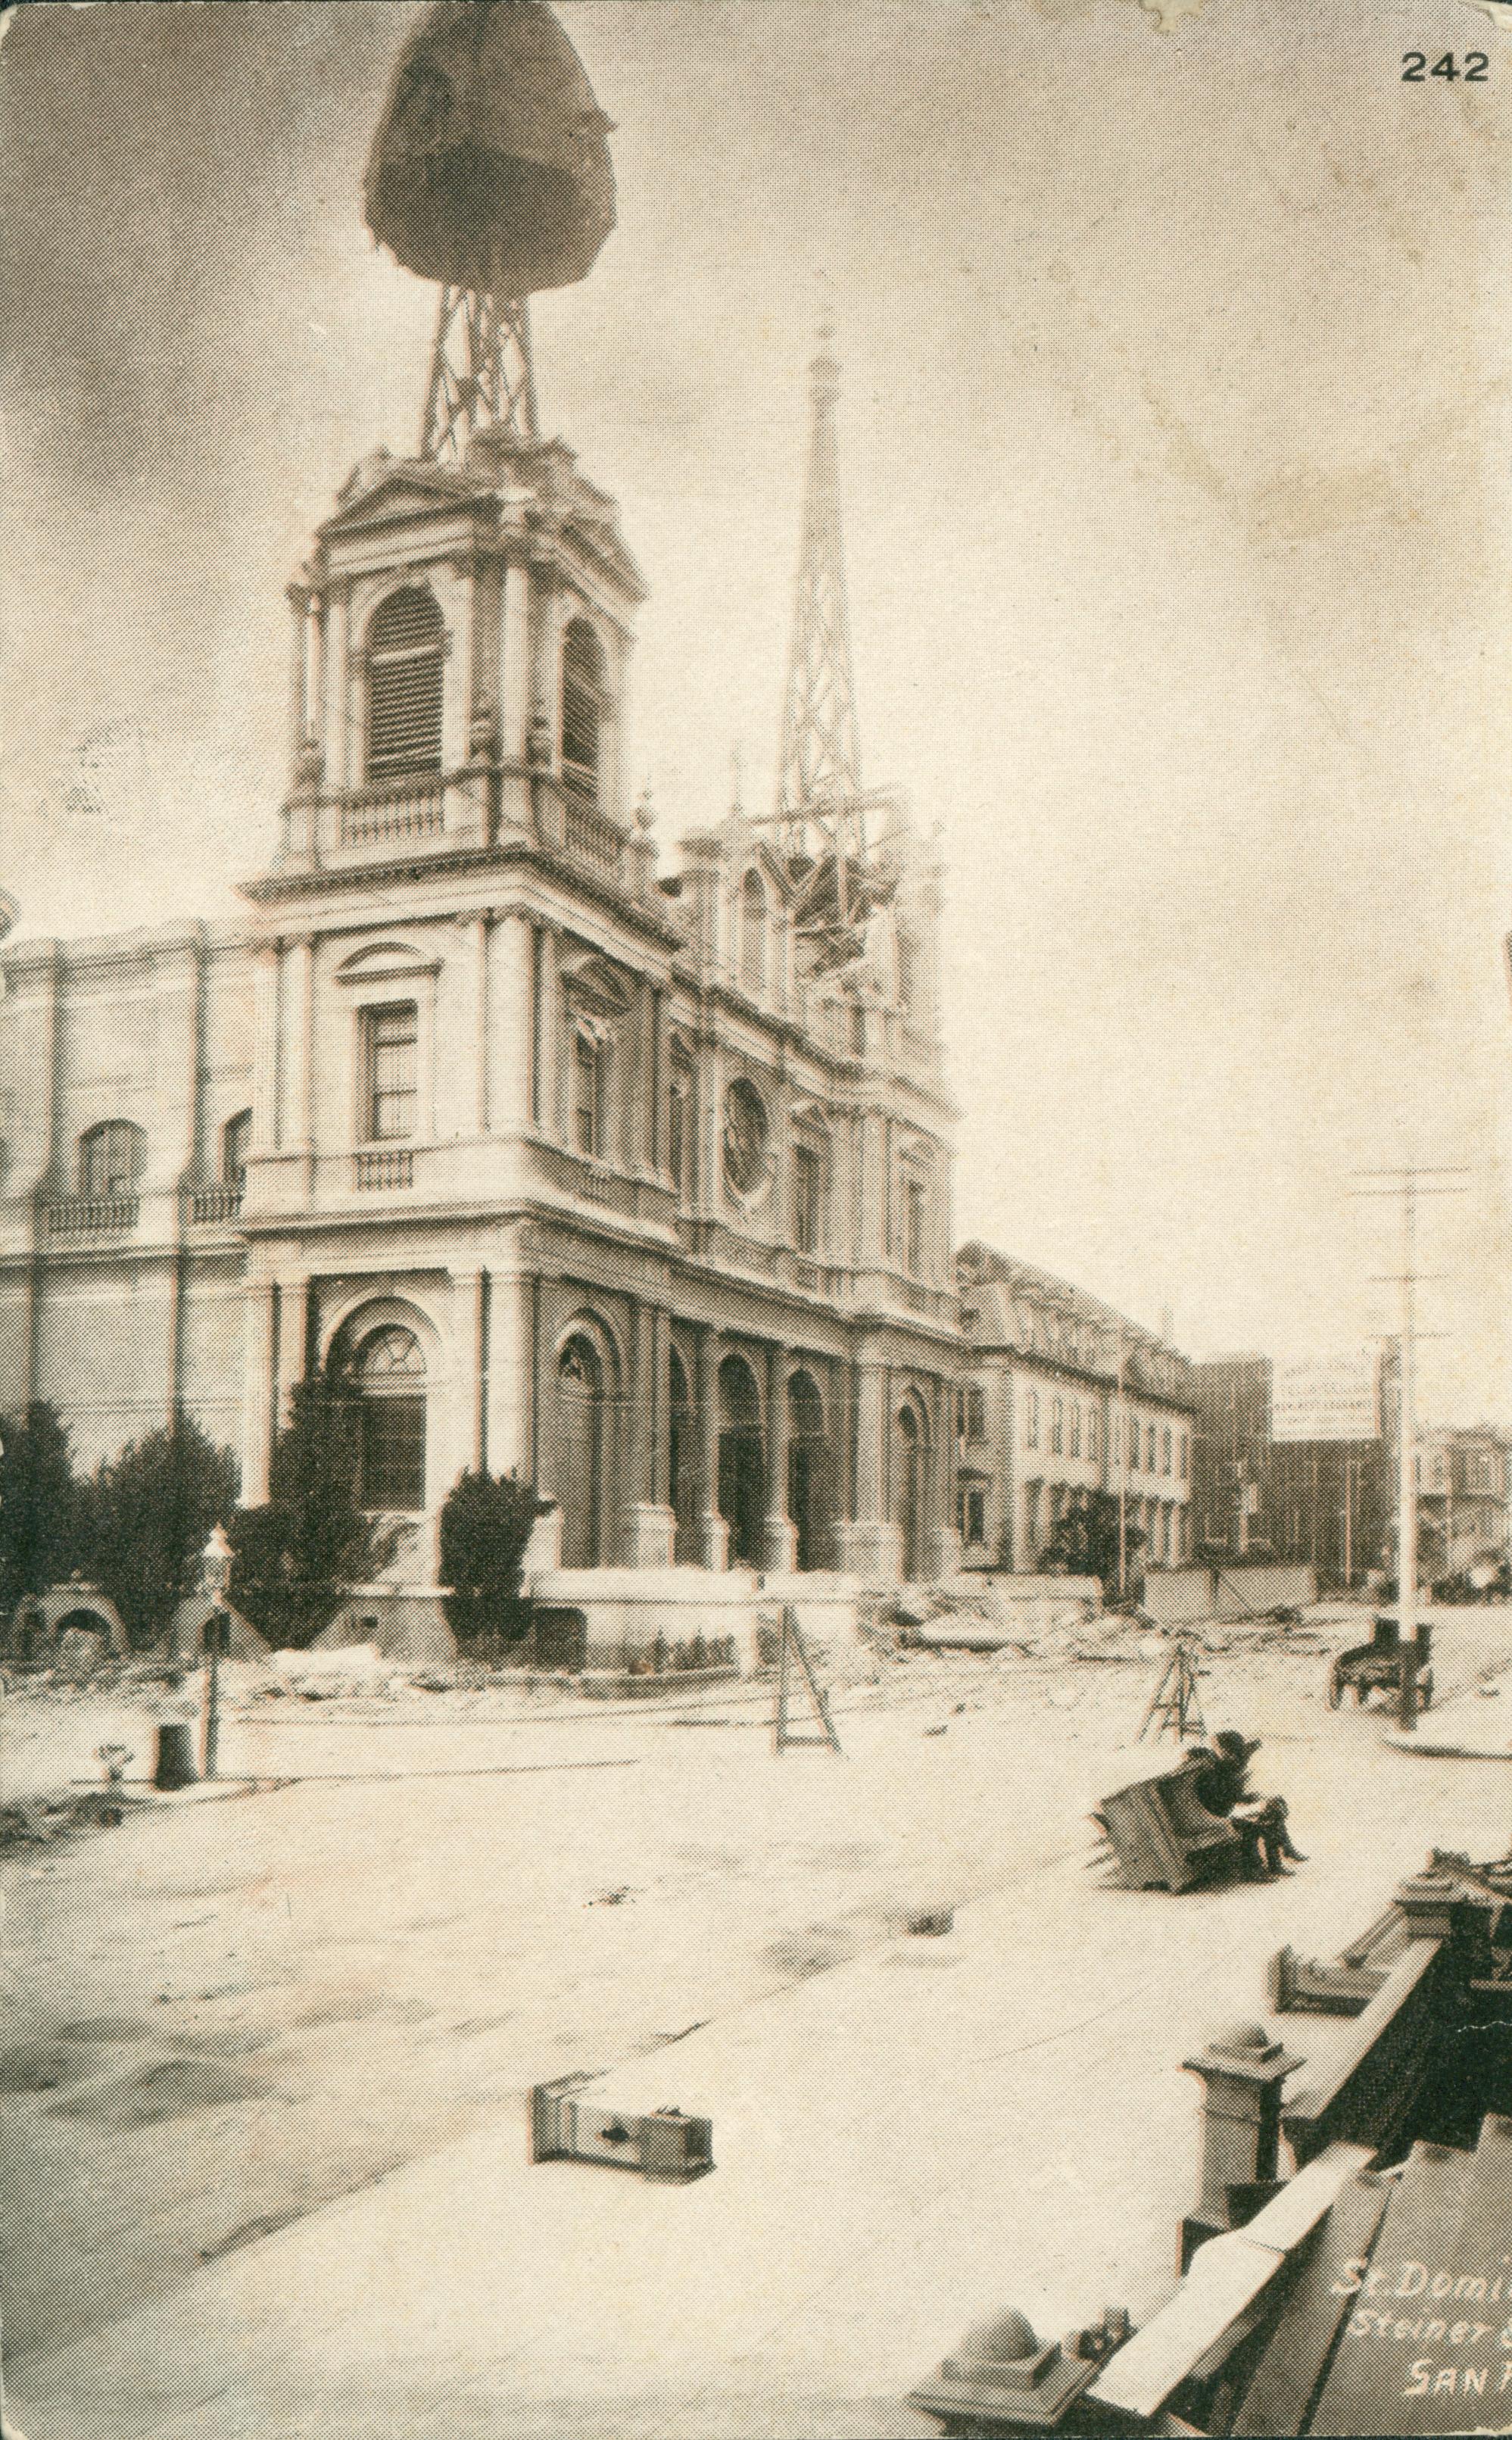 Photo showing the destruction done to St. Dominic's' Church